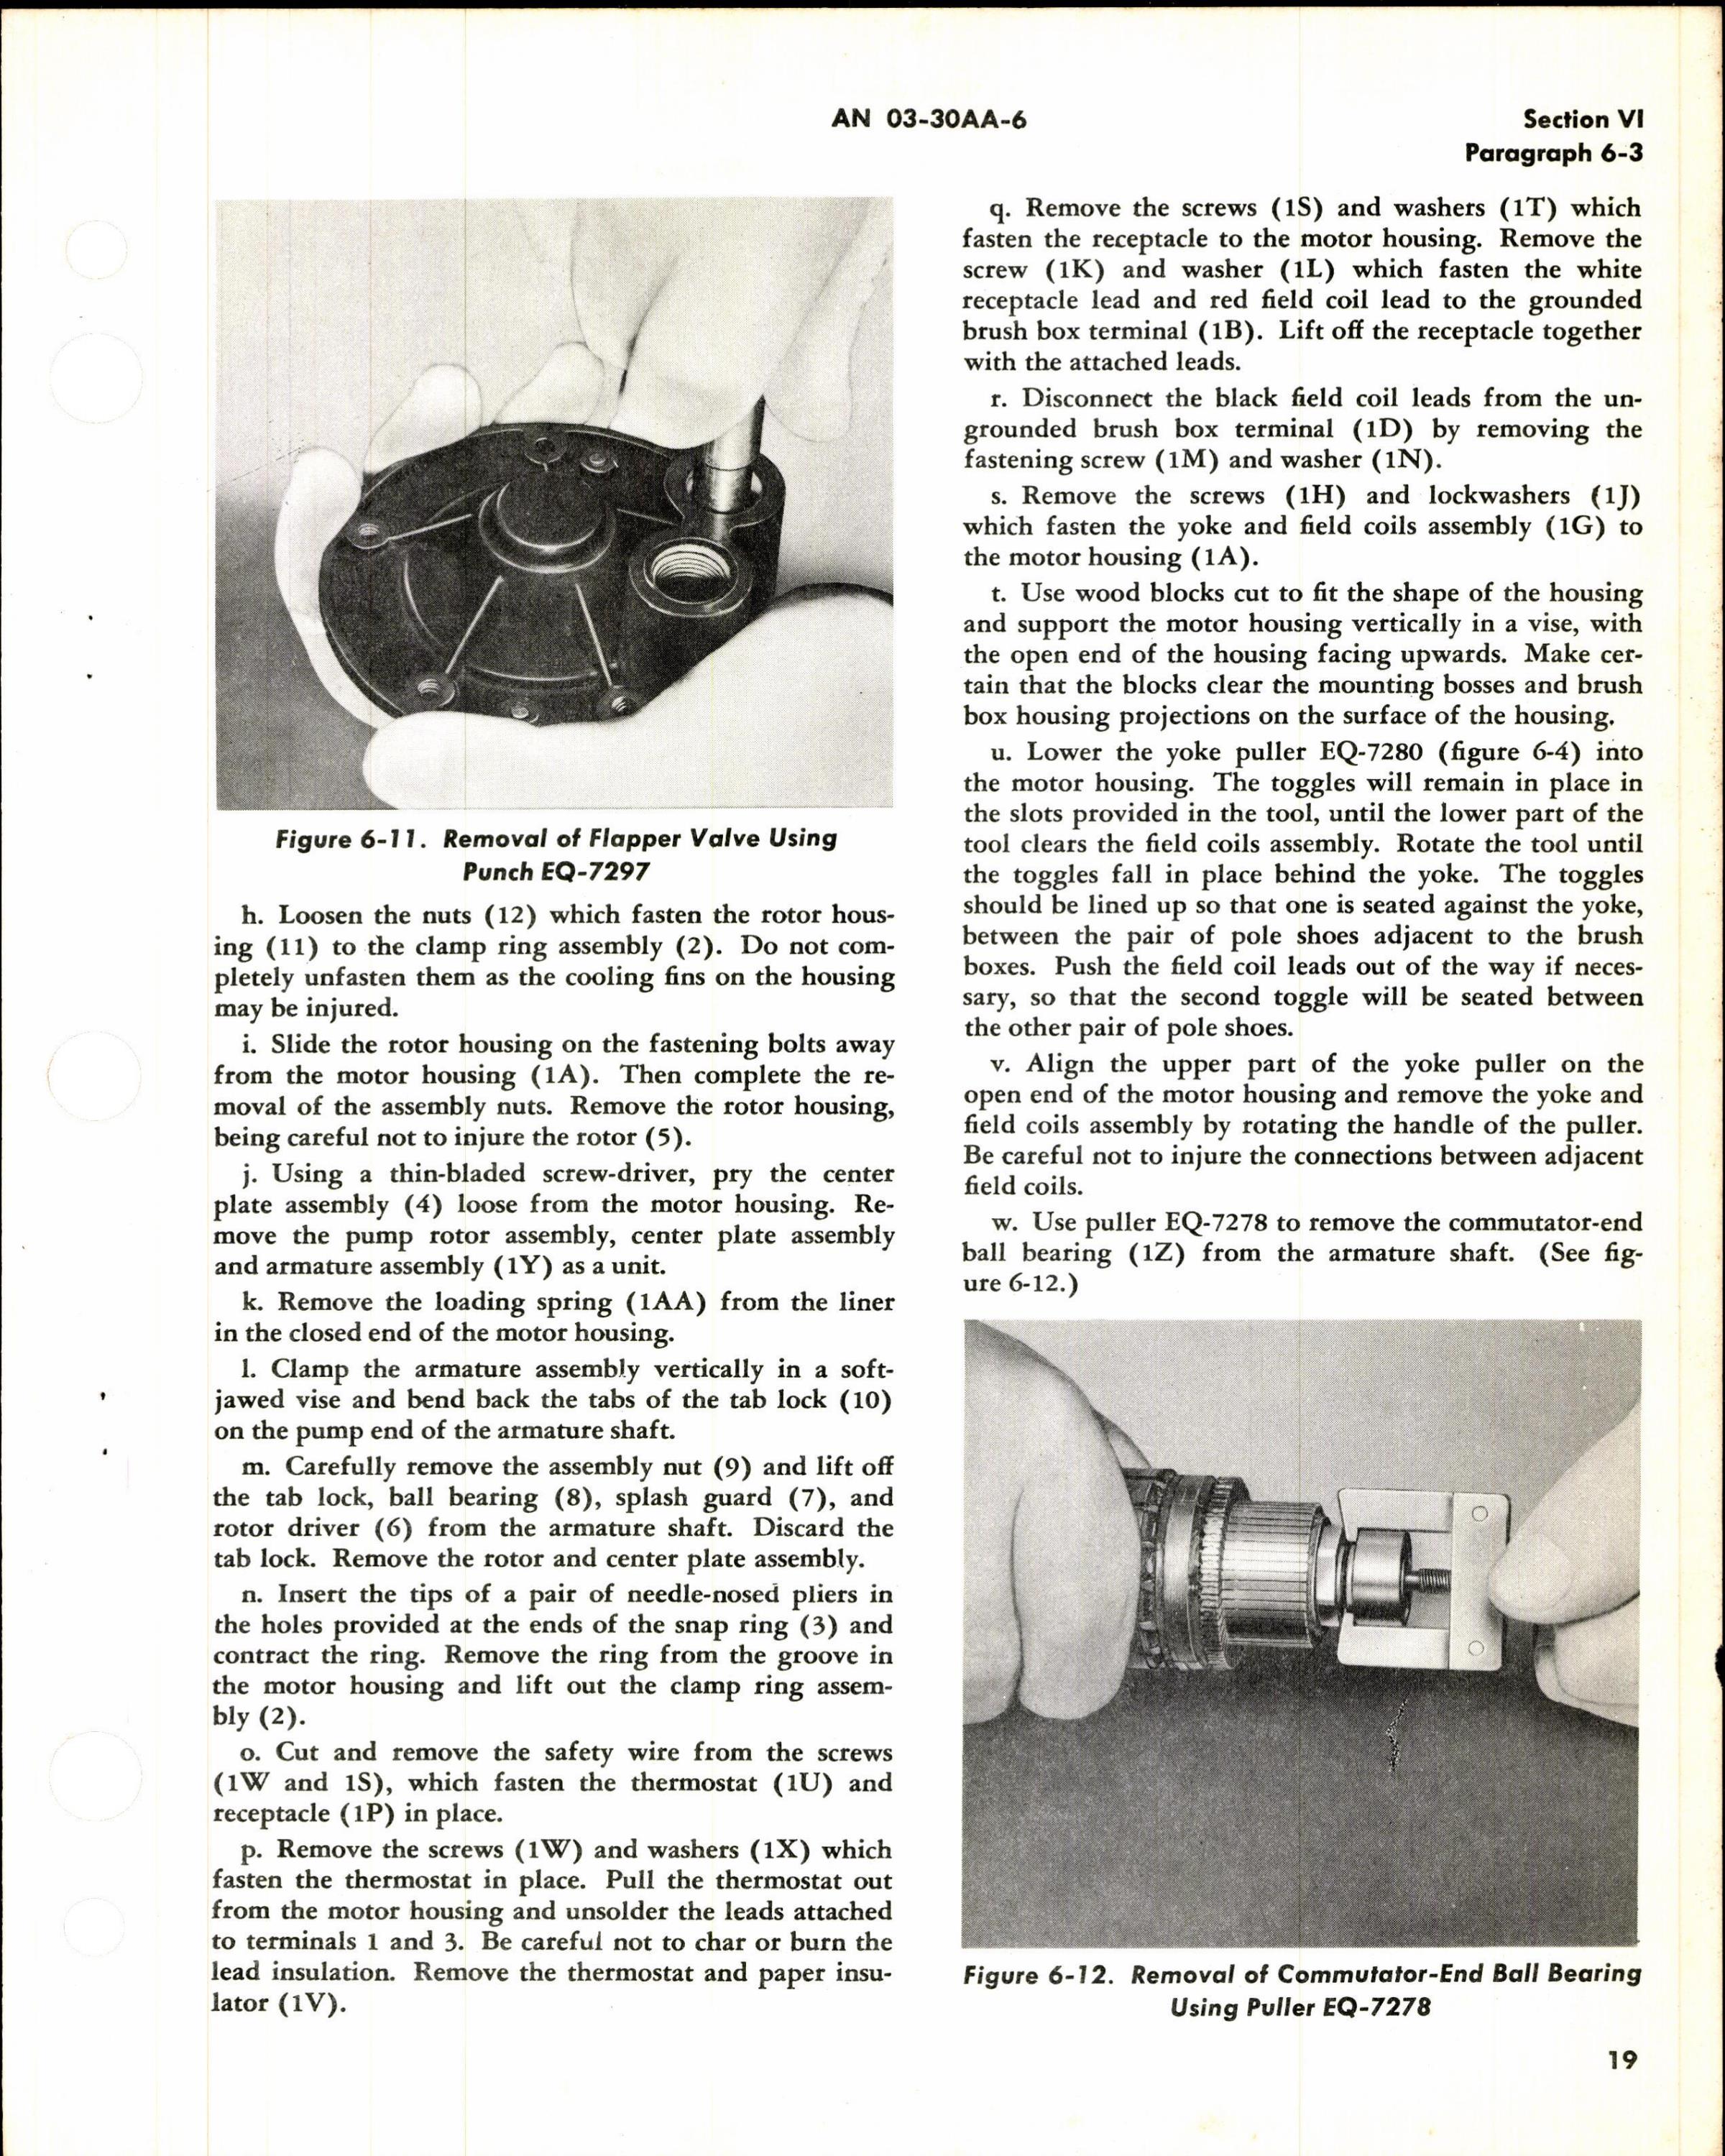 Sample page 3 from AirCorps Library document: Handbook of Operation, Service, & Overhaul Instructions for Motor Driven Dry Air Pump